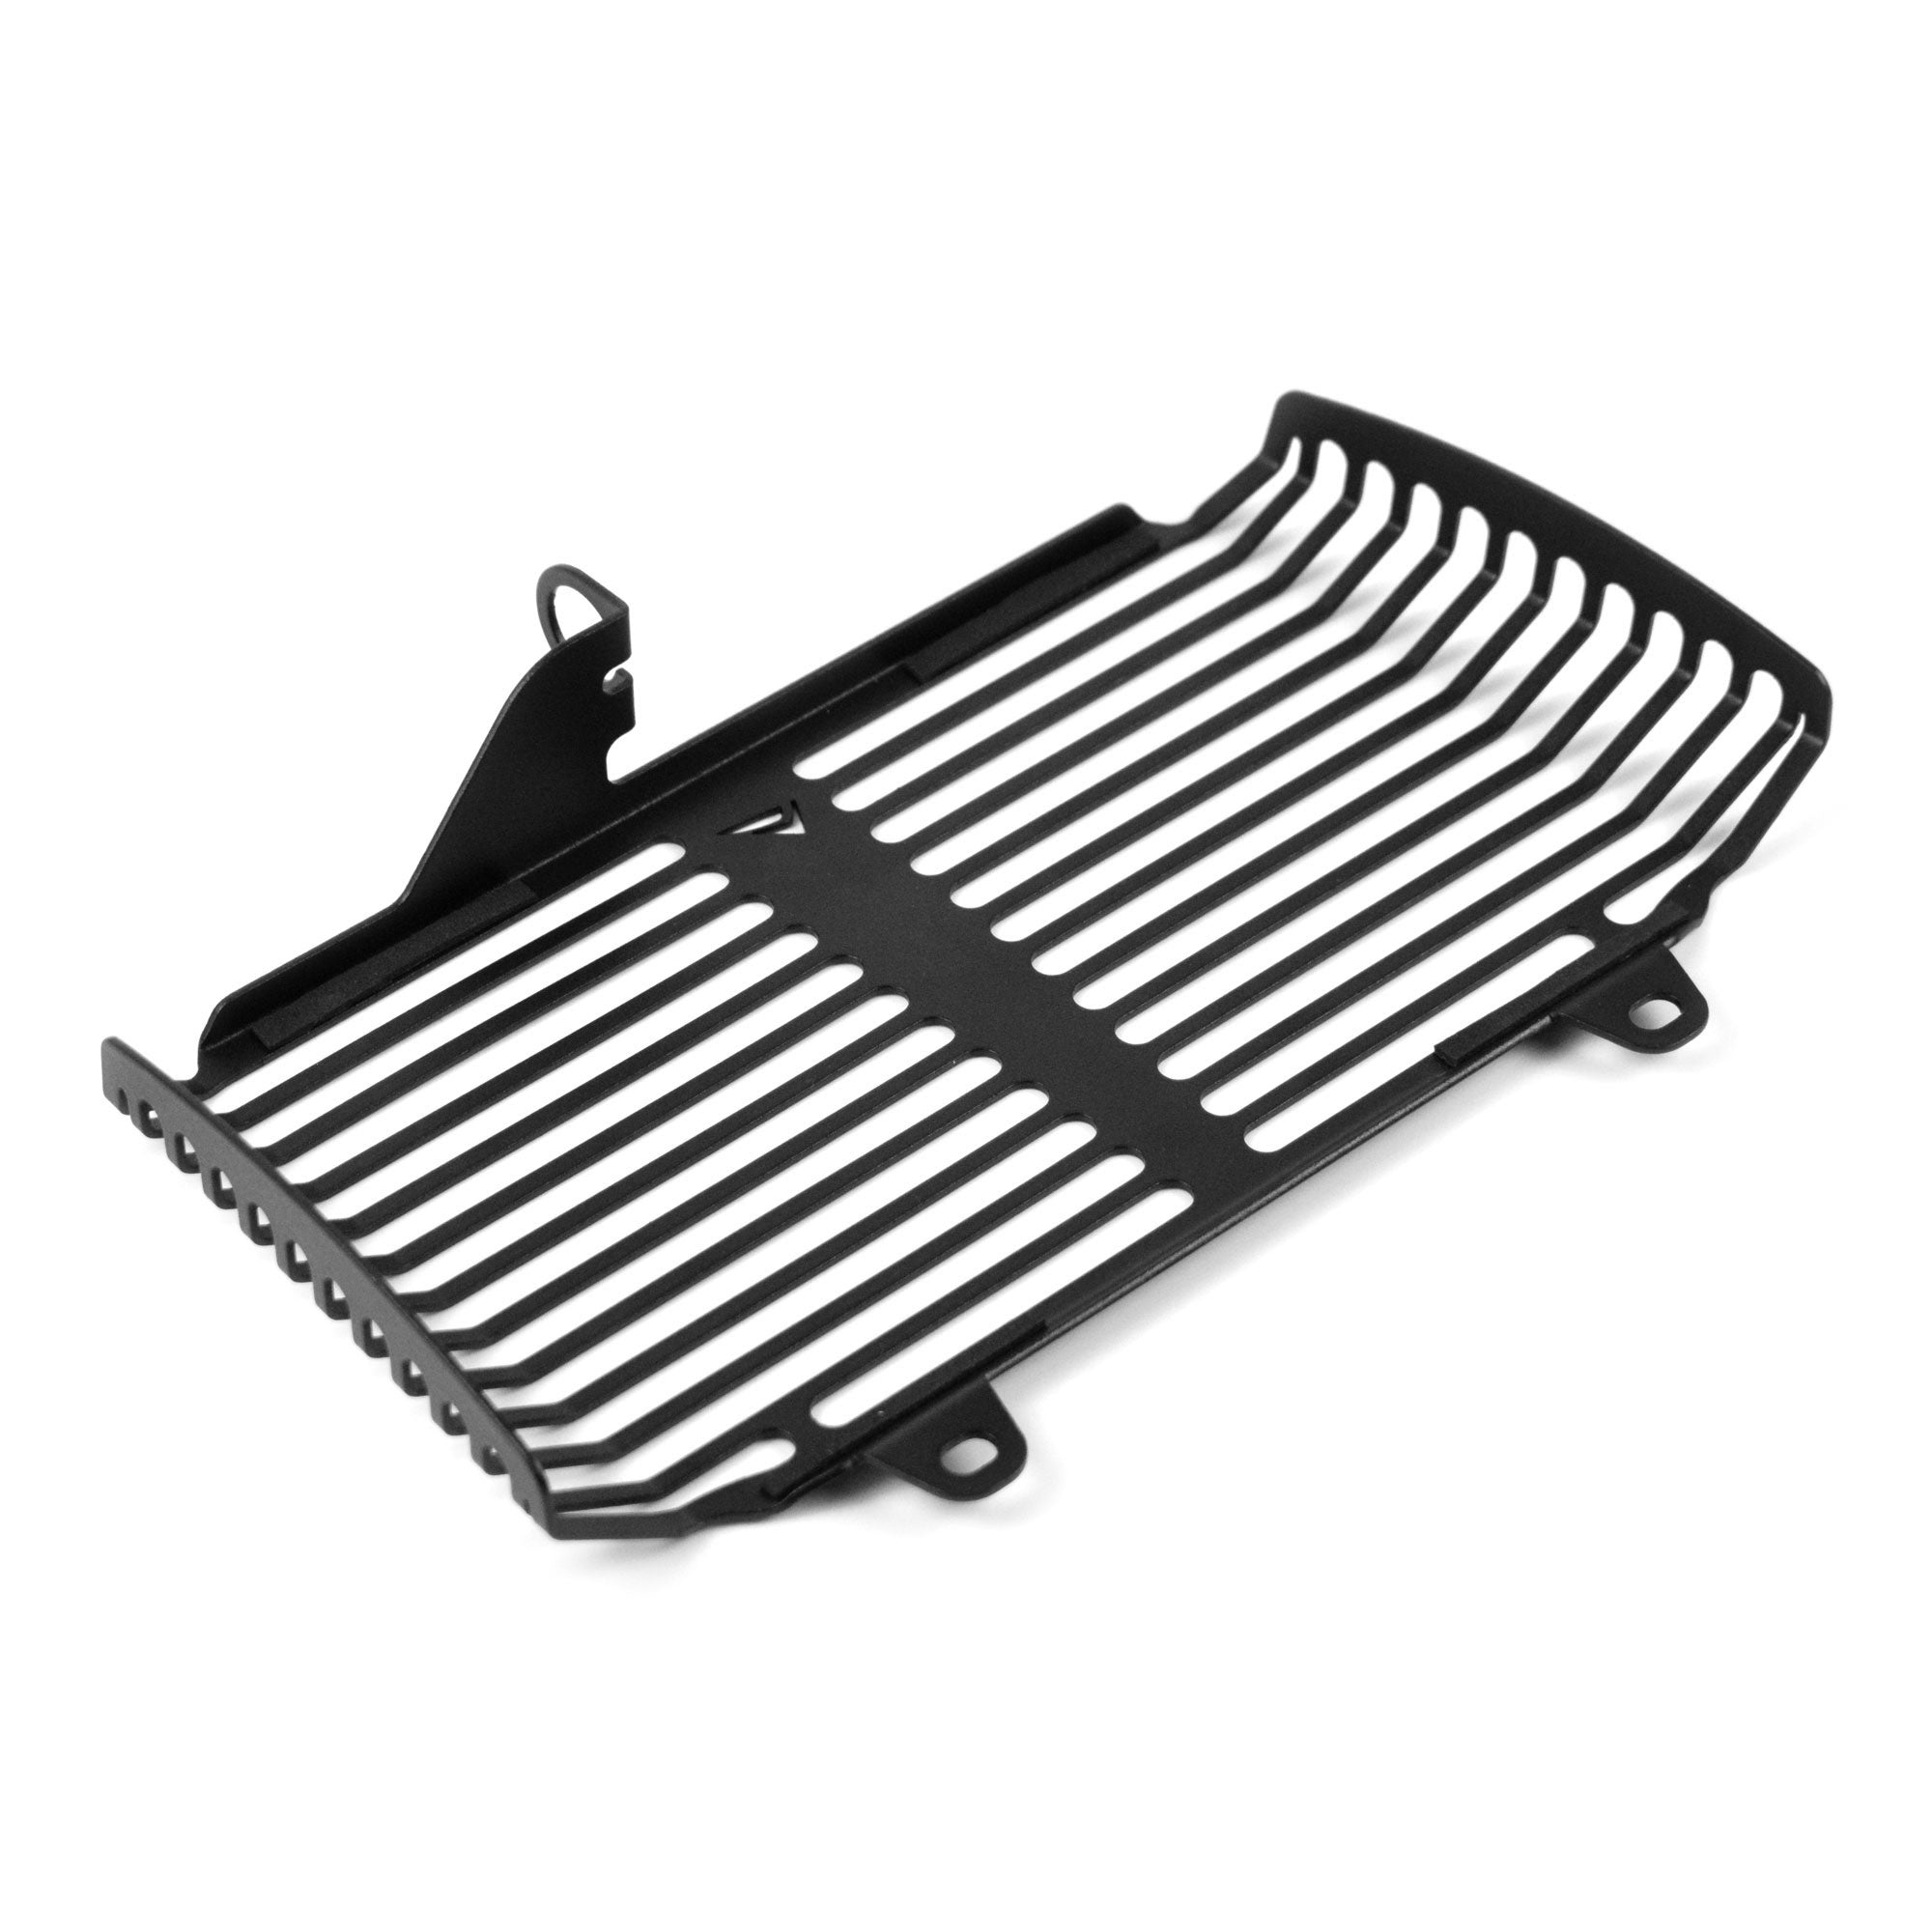 Pyramid Oil Cooler Guard | Matte Black | Yamaha MT-10 2016>Current-522096M-Radiator Guards-Pyramid Motorcycle Accessories